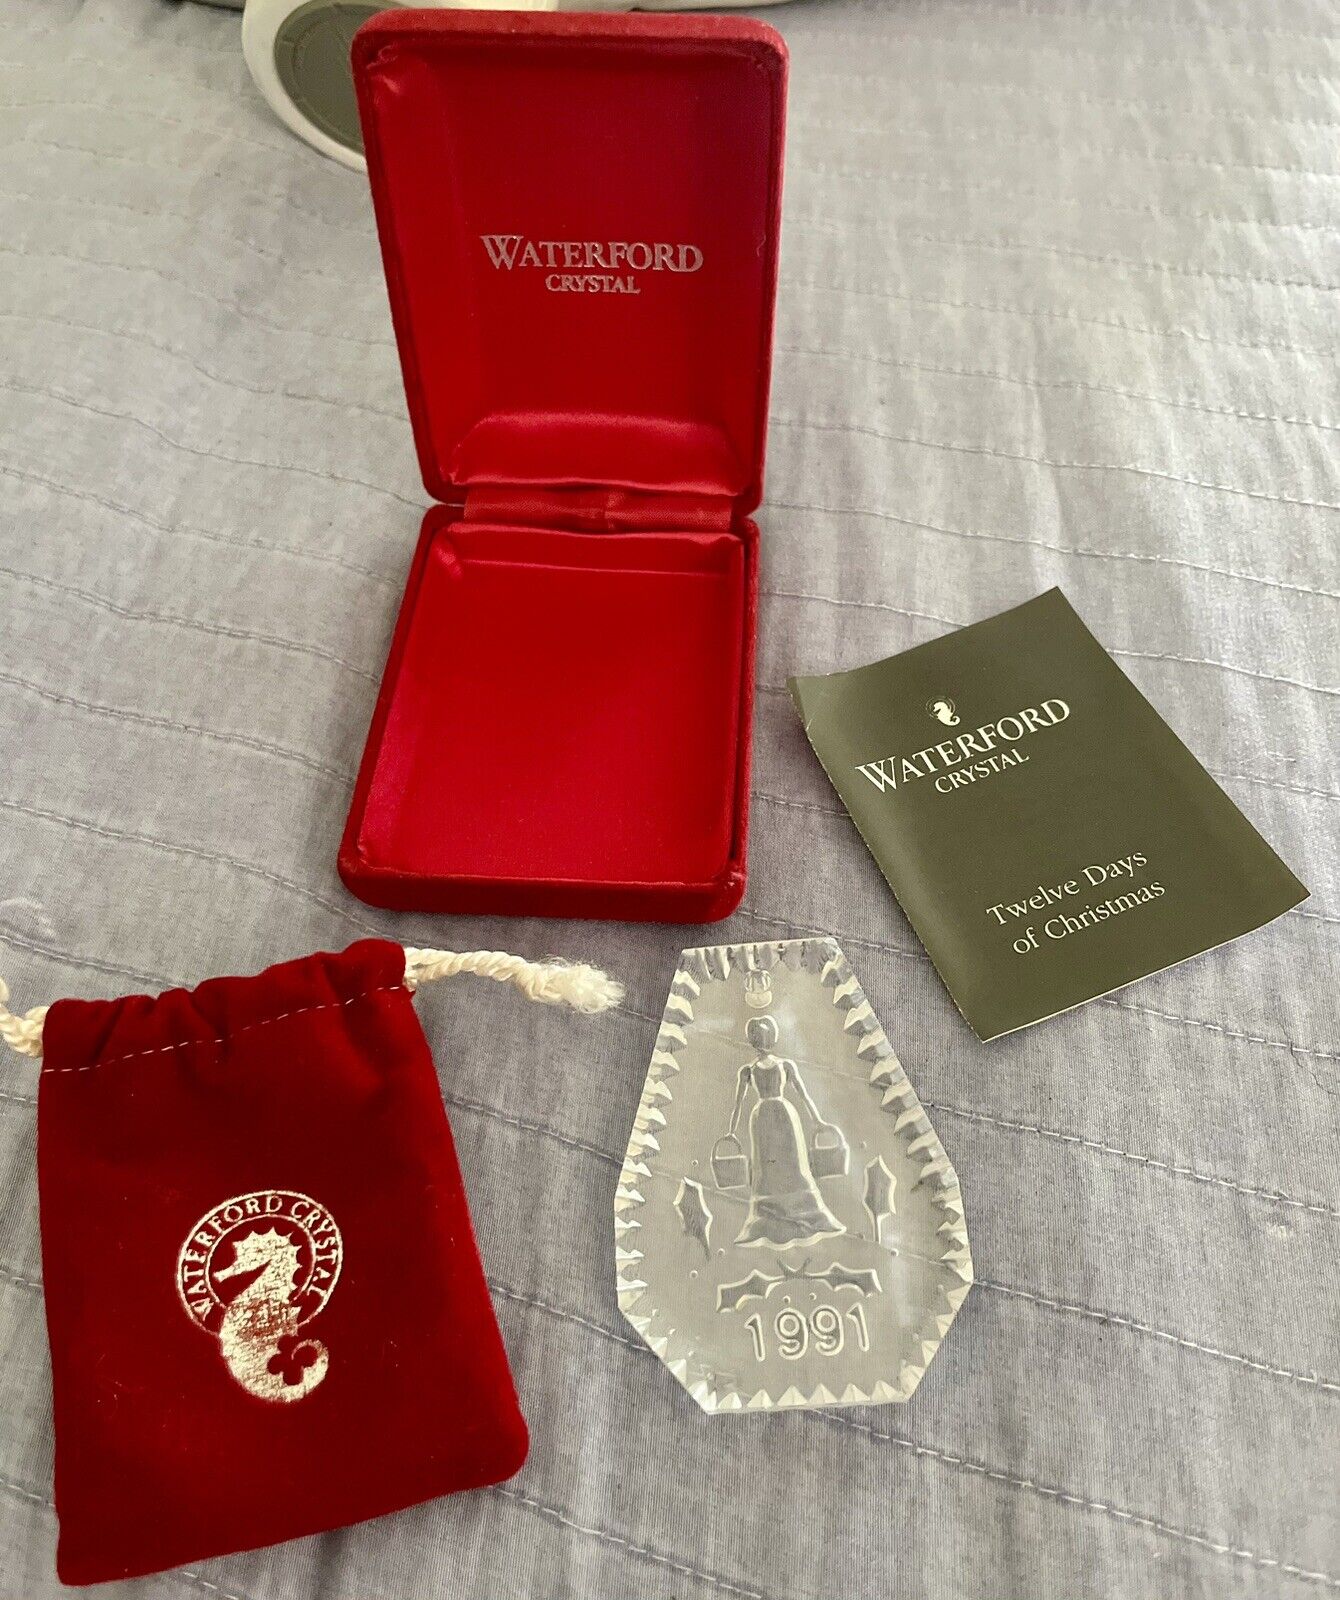 1992 Waterford Crystal Twelve Days of Christmas 8 Maids a Milking Ornament